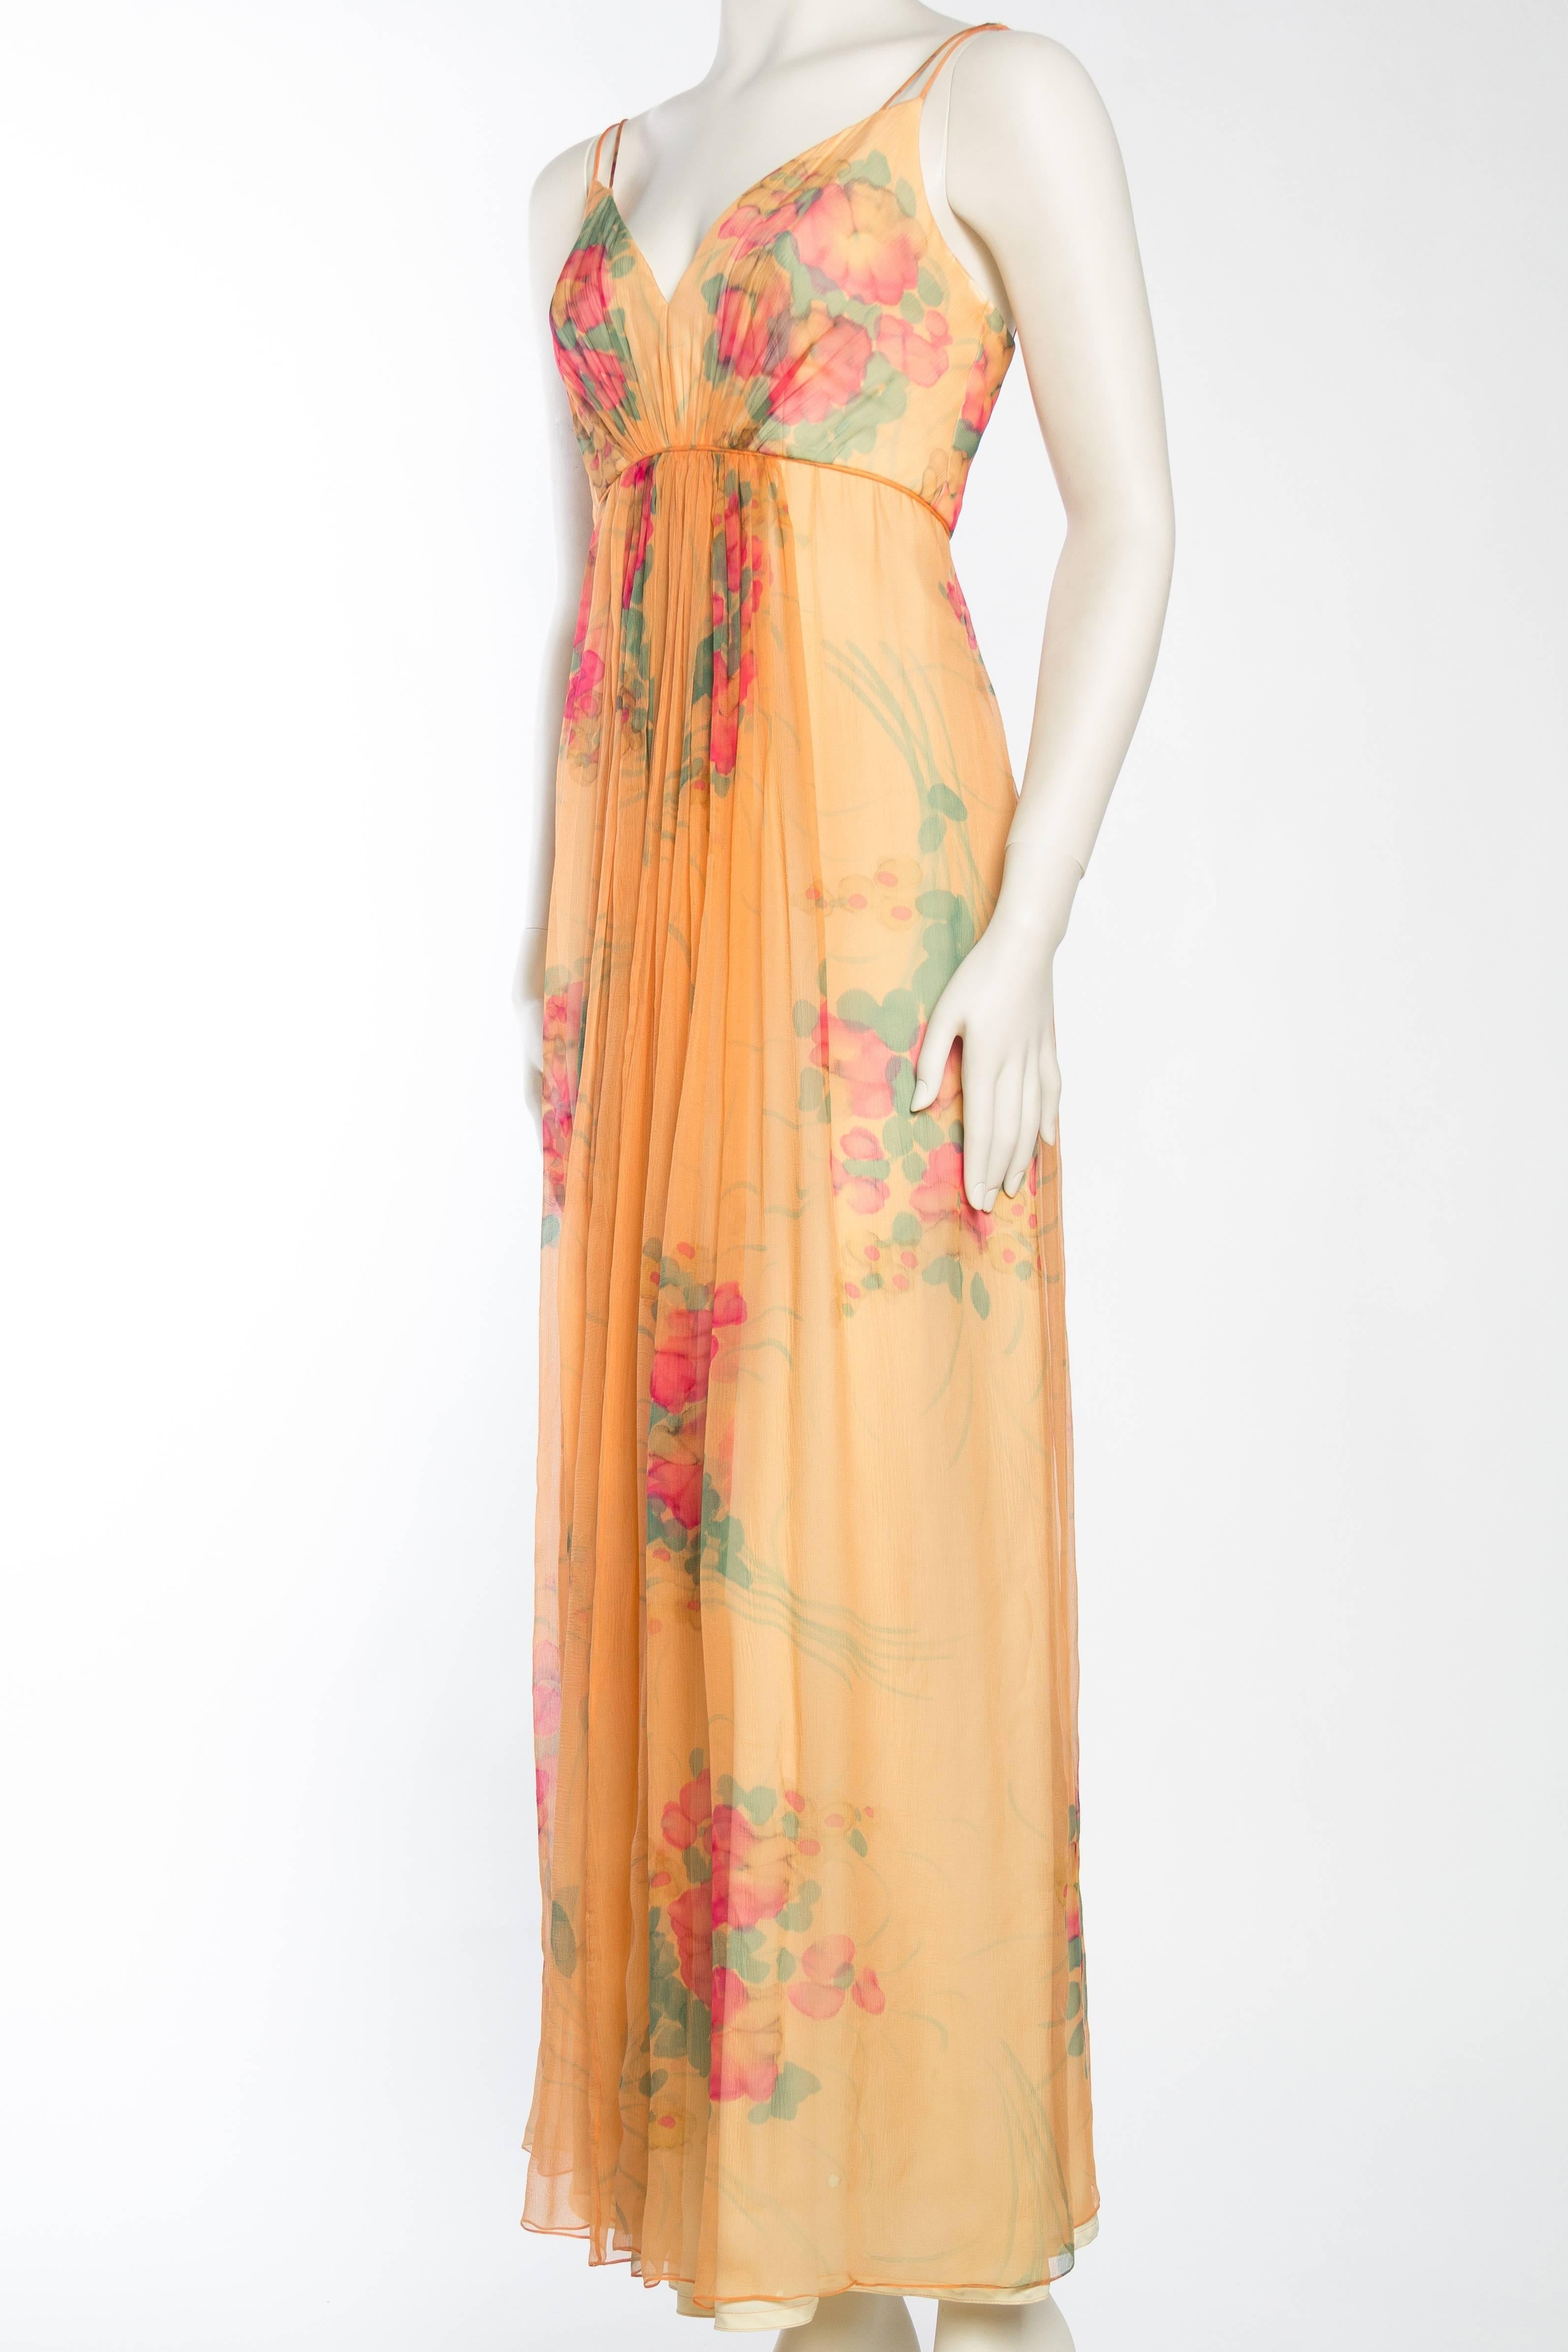 1970s Alfred Bosand Hand Painted Silk Chiffon Gown with Cape 1